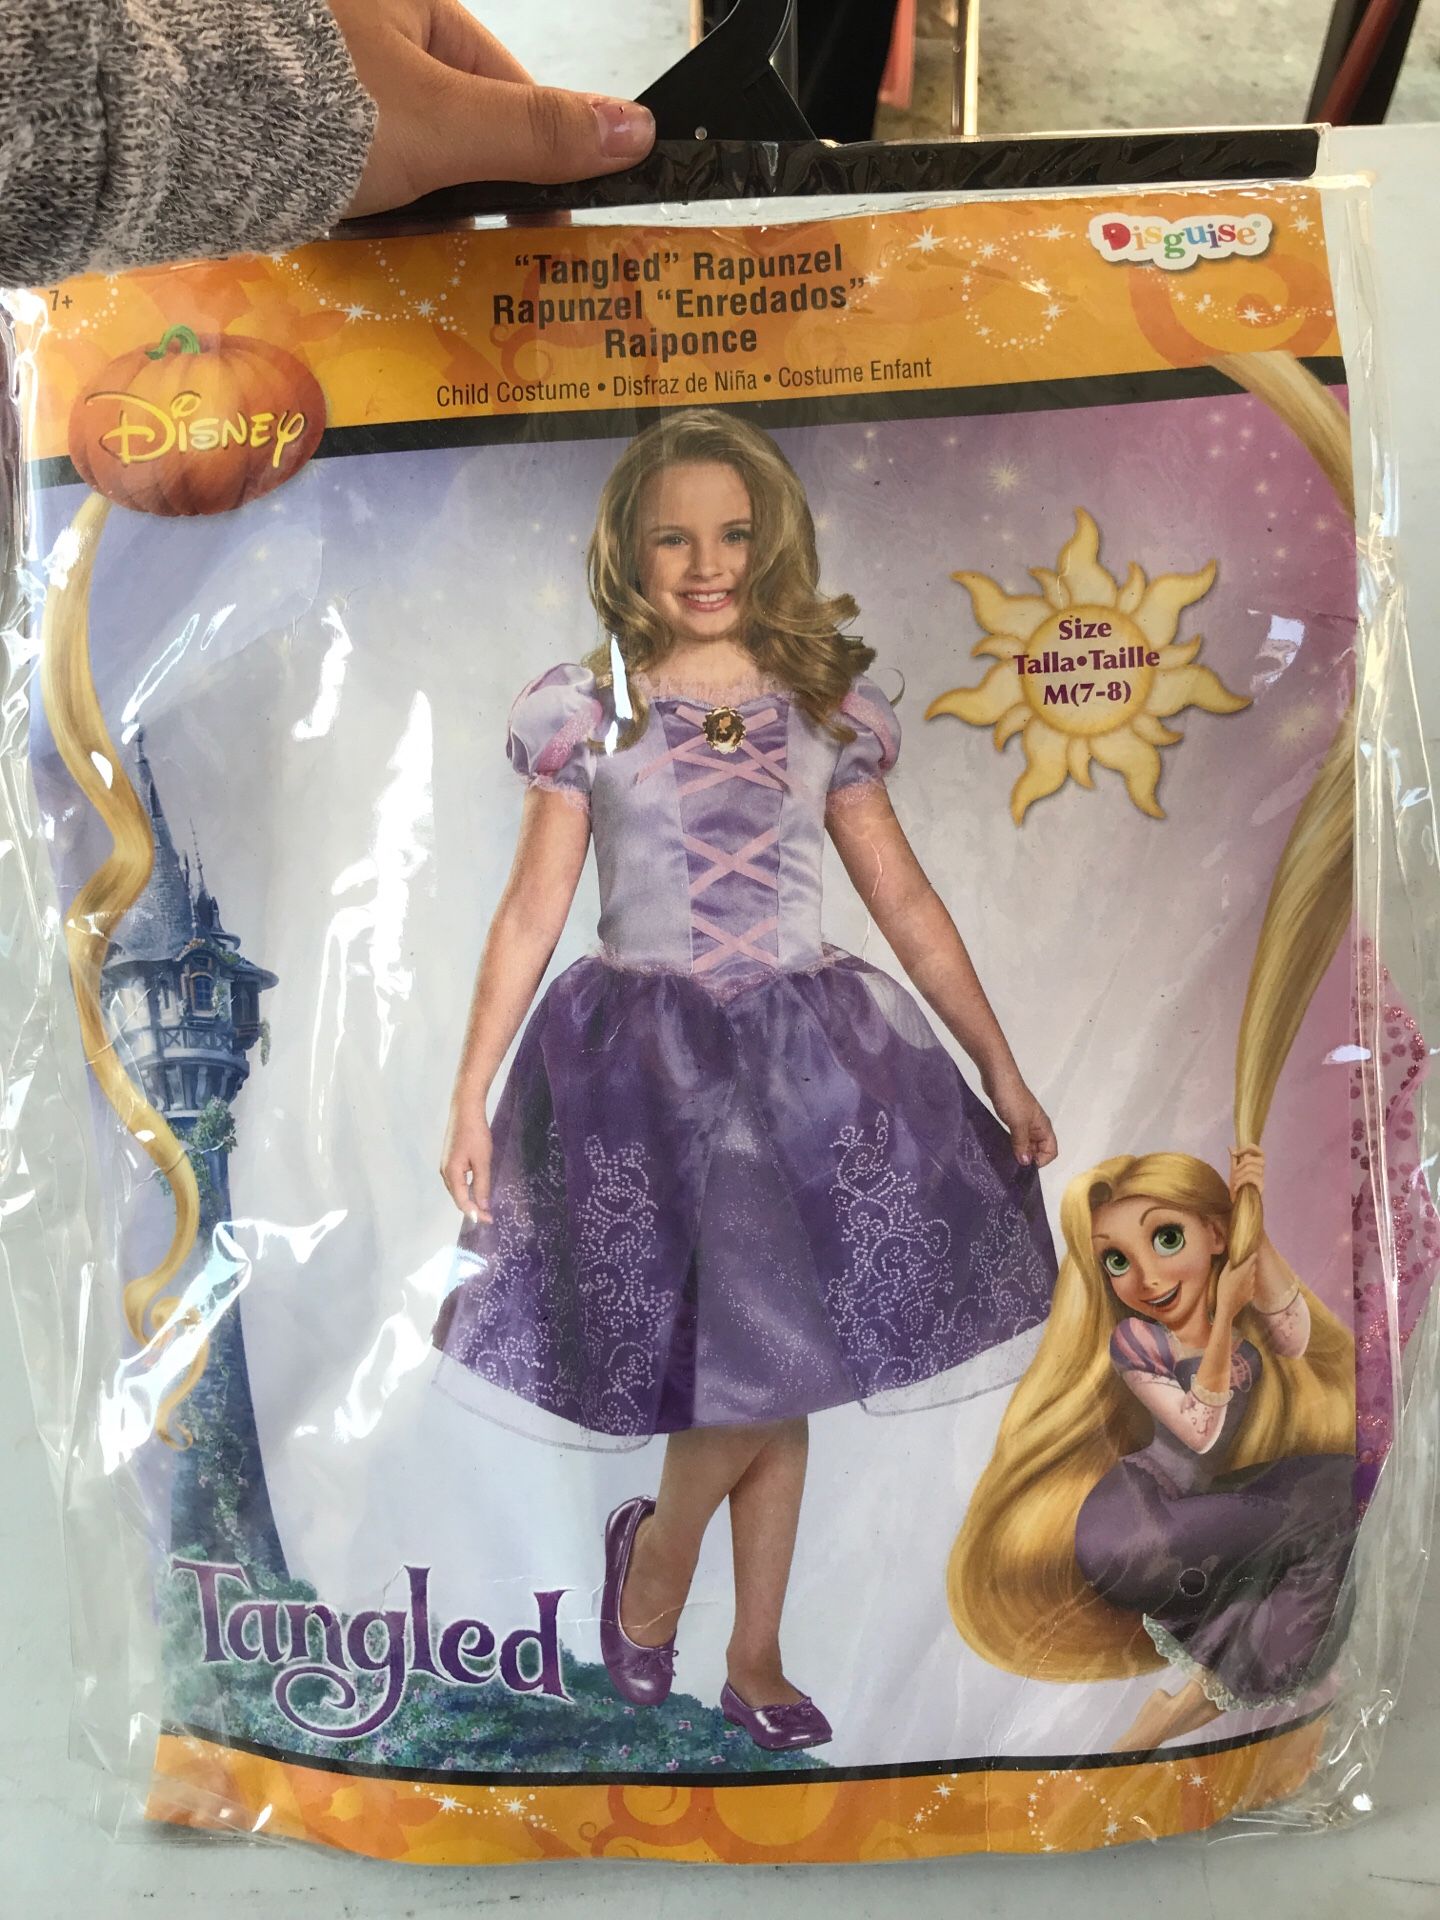 Child Rapunzels from Disney’s “Tangled” costume